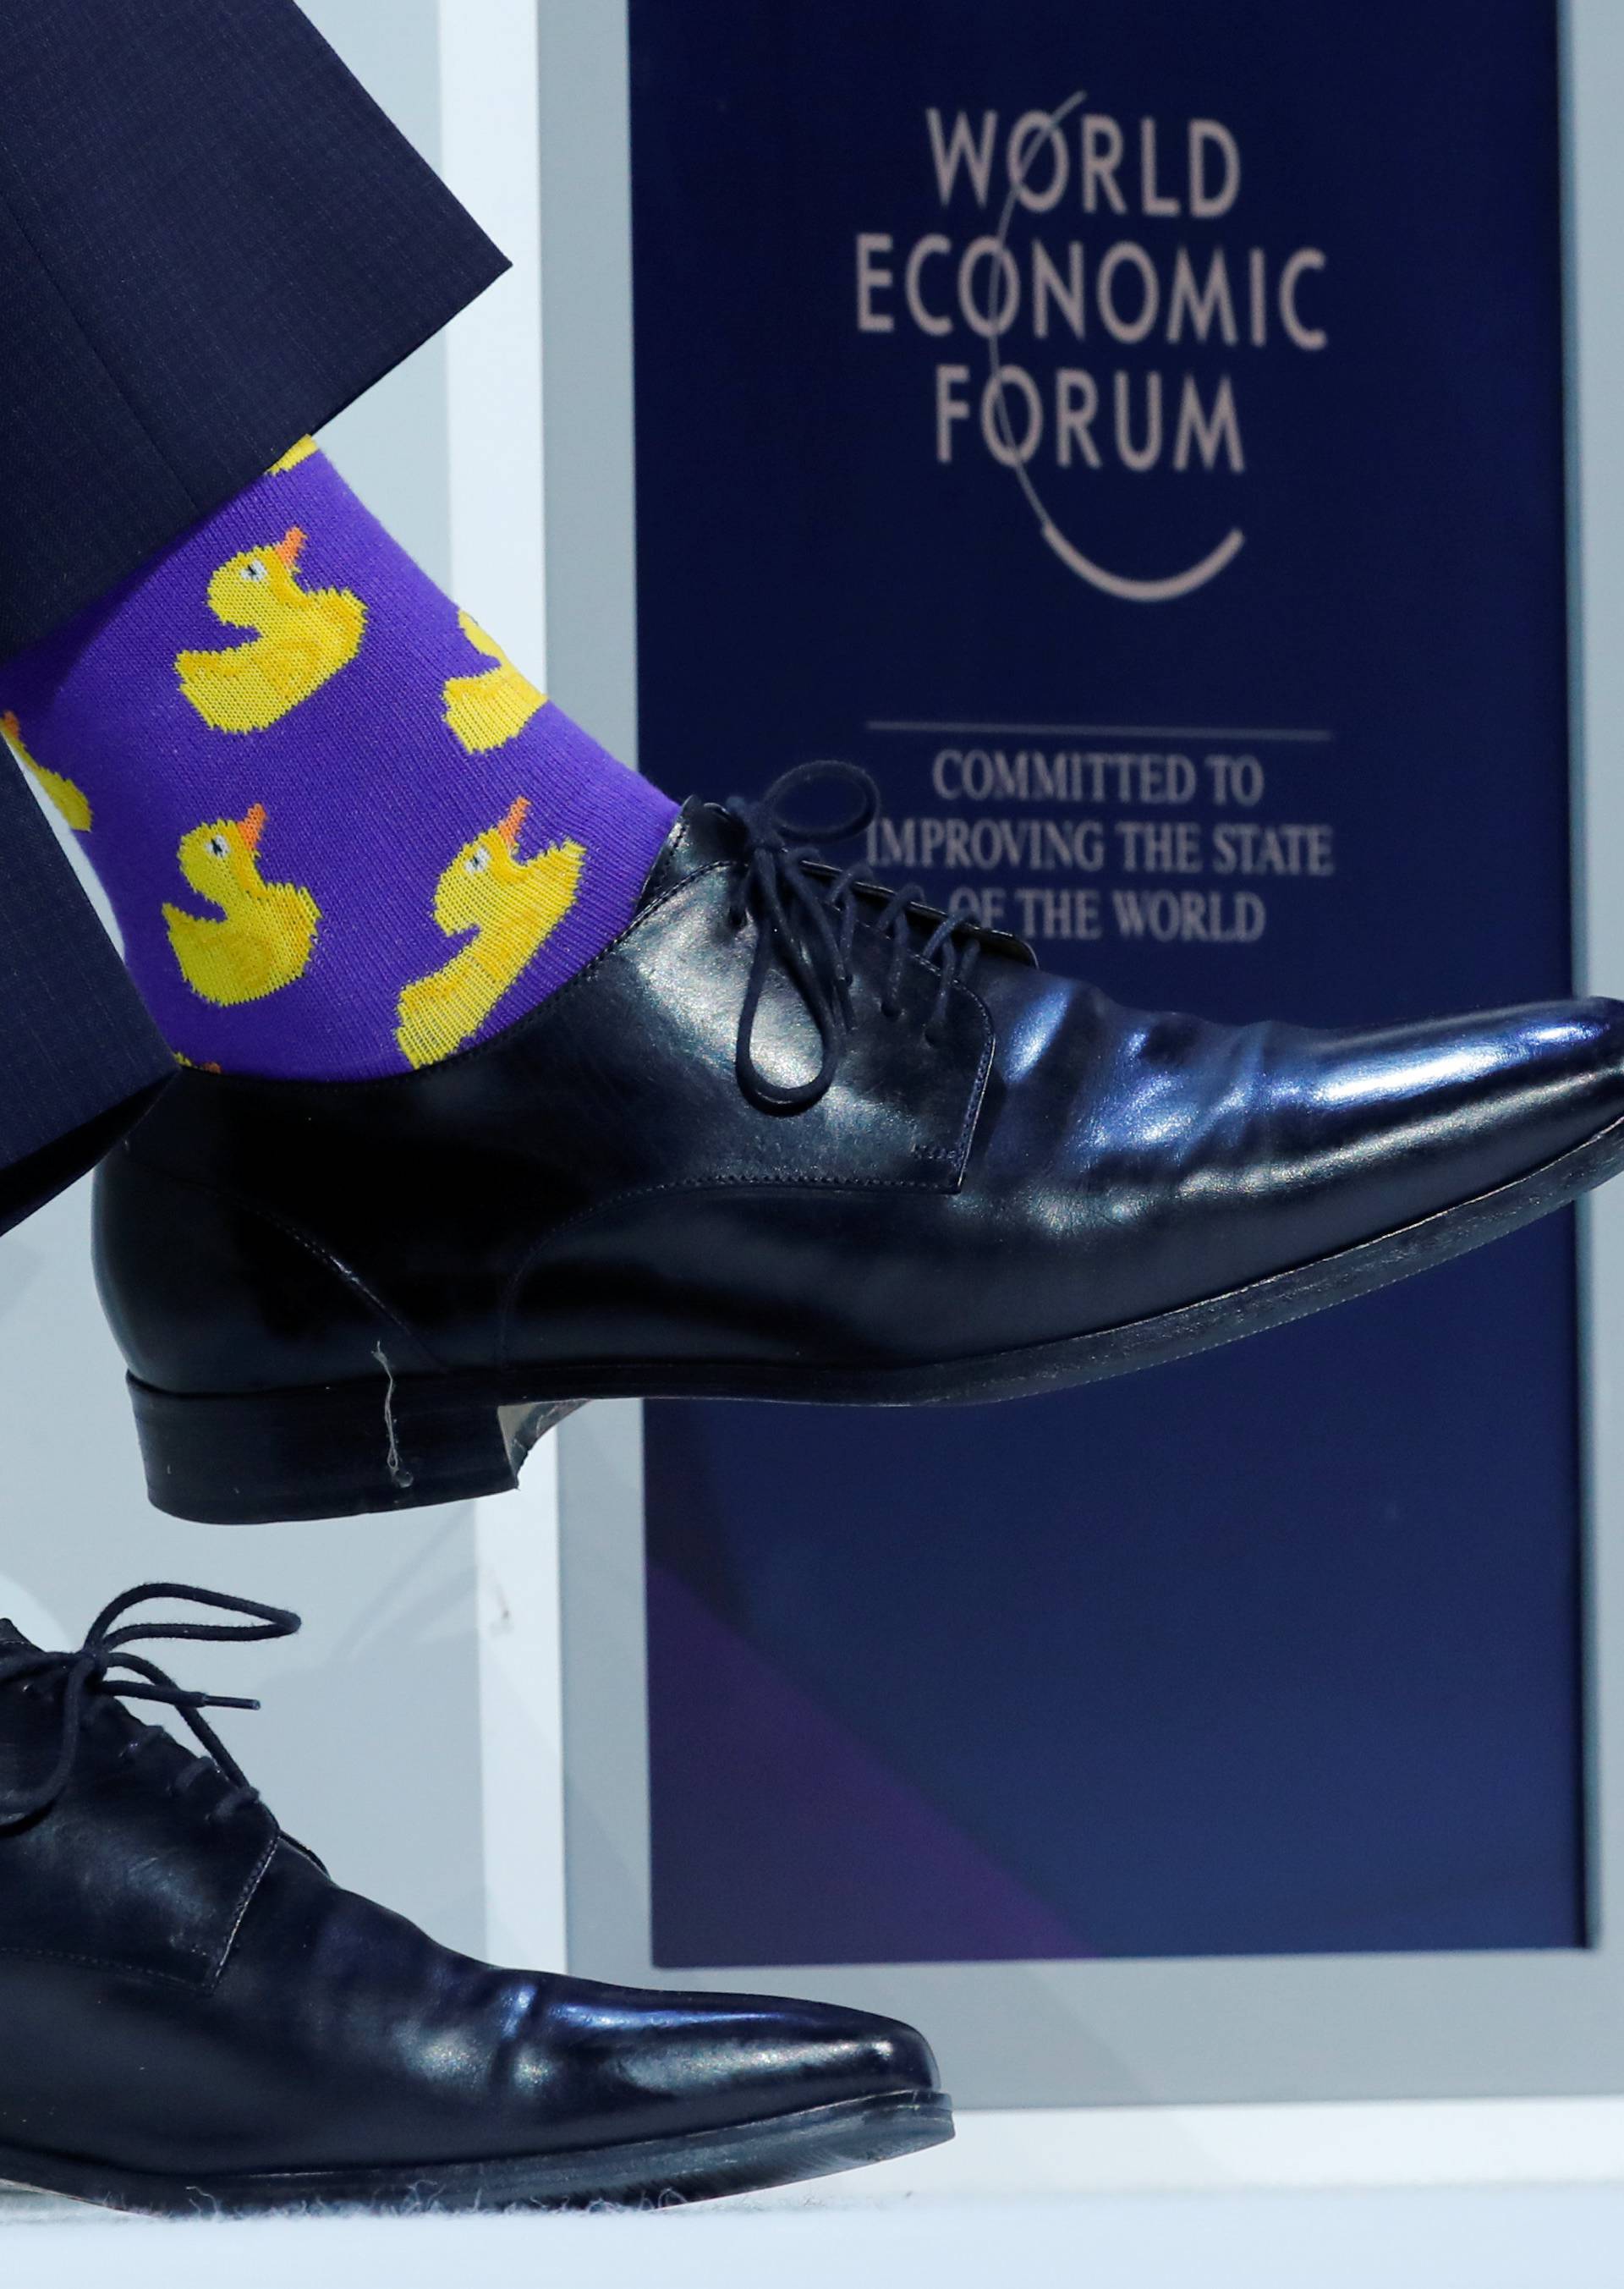 Canadian Prime Minister's Justin Trudeau's socks are seen as he attends the World Economic Forum (WEF) annual meeting in Davos